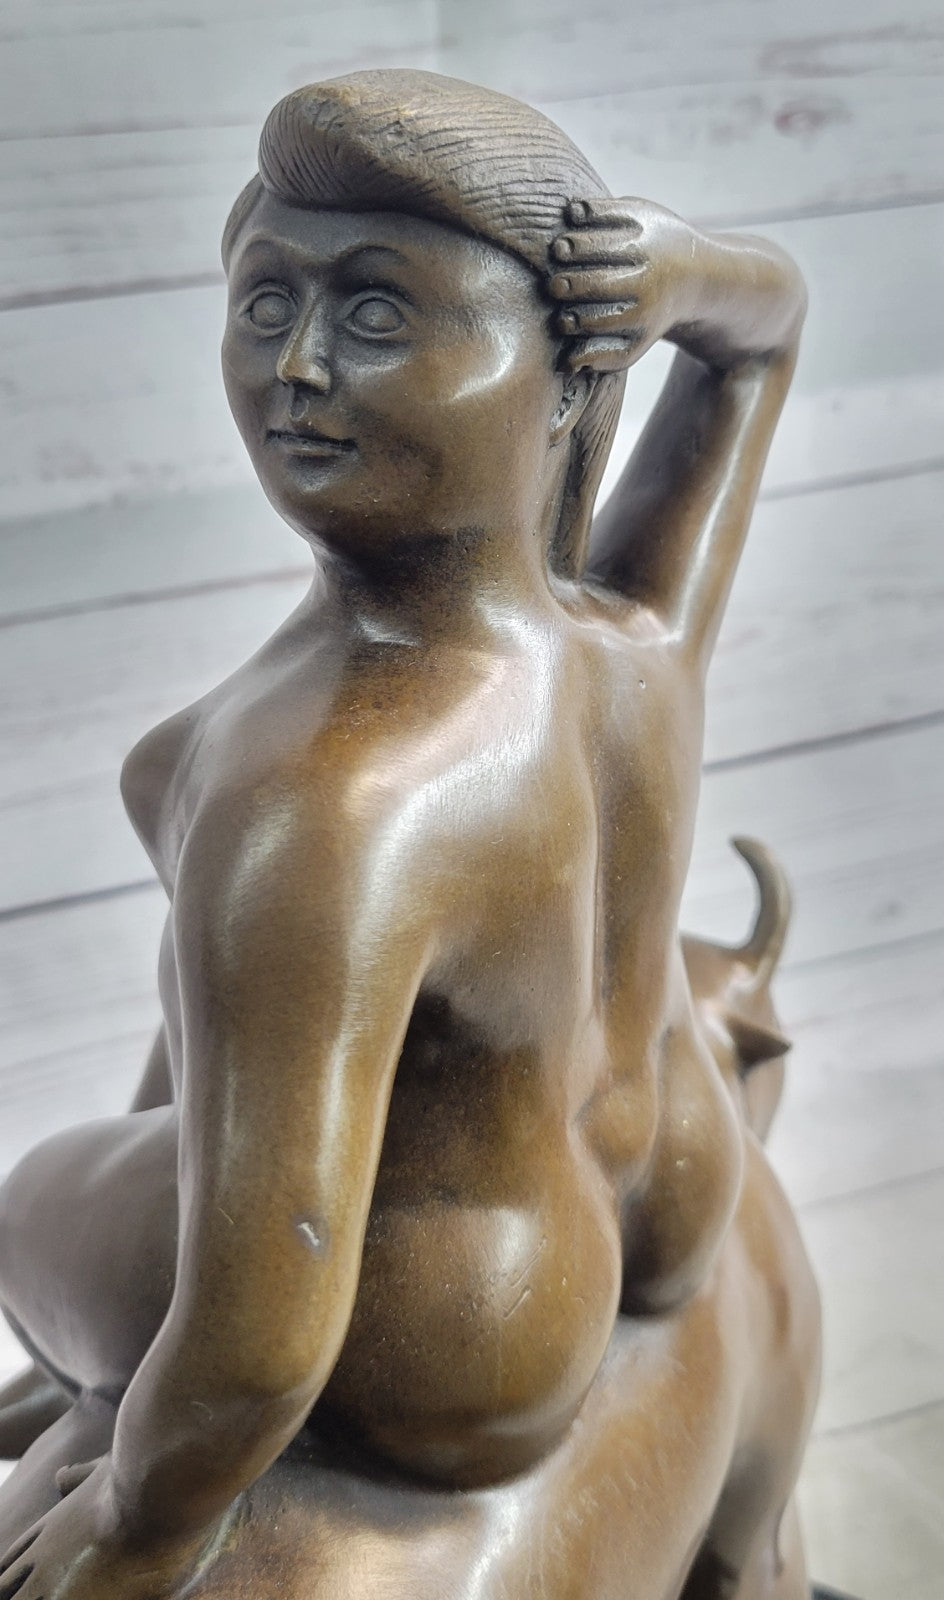 Handcrafted bronze sculpture SALE Art Modern Bull On Lady Nude Abstract Botero